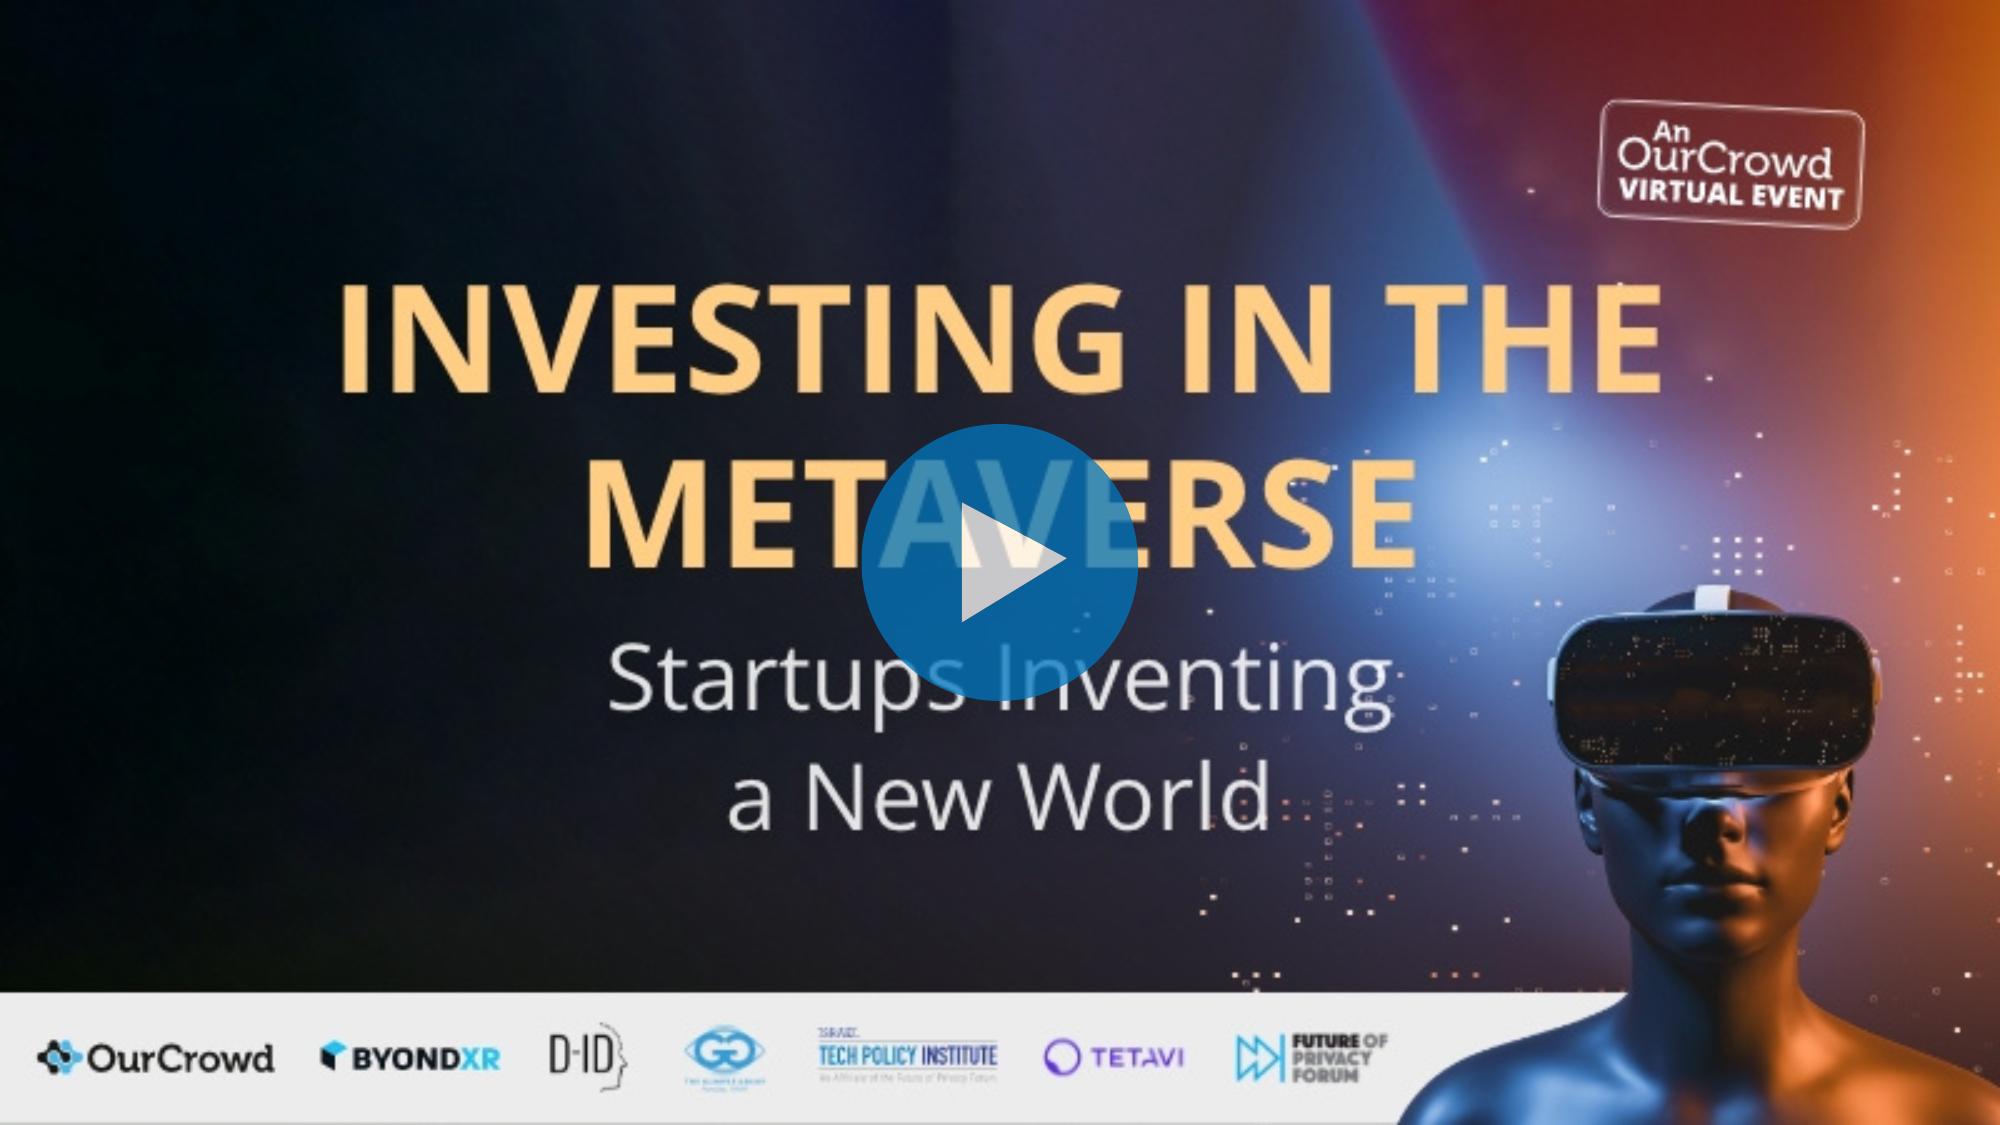 Metaverse Investment Opportunities